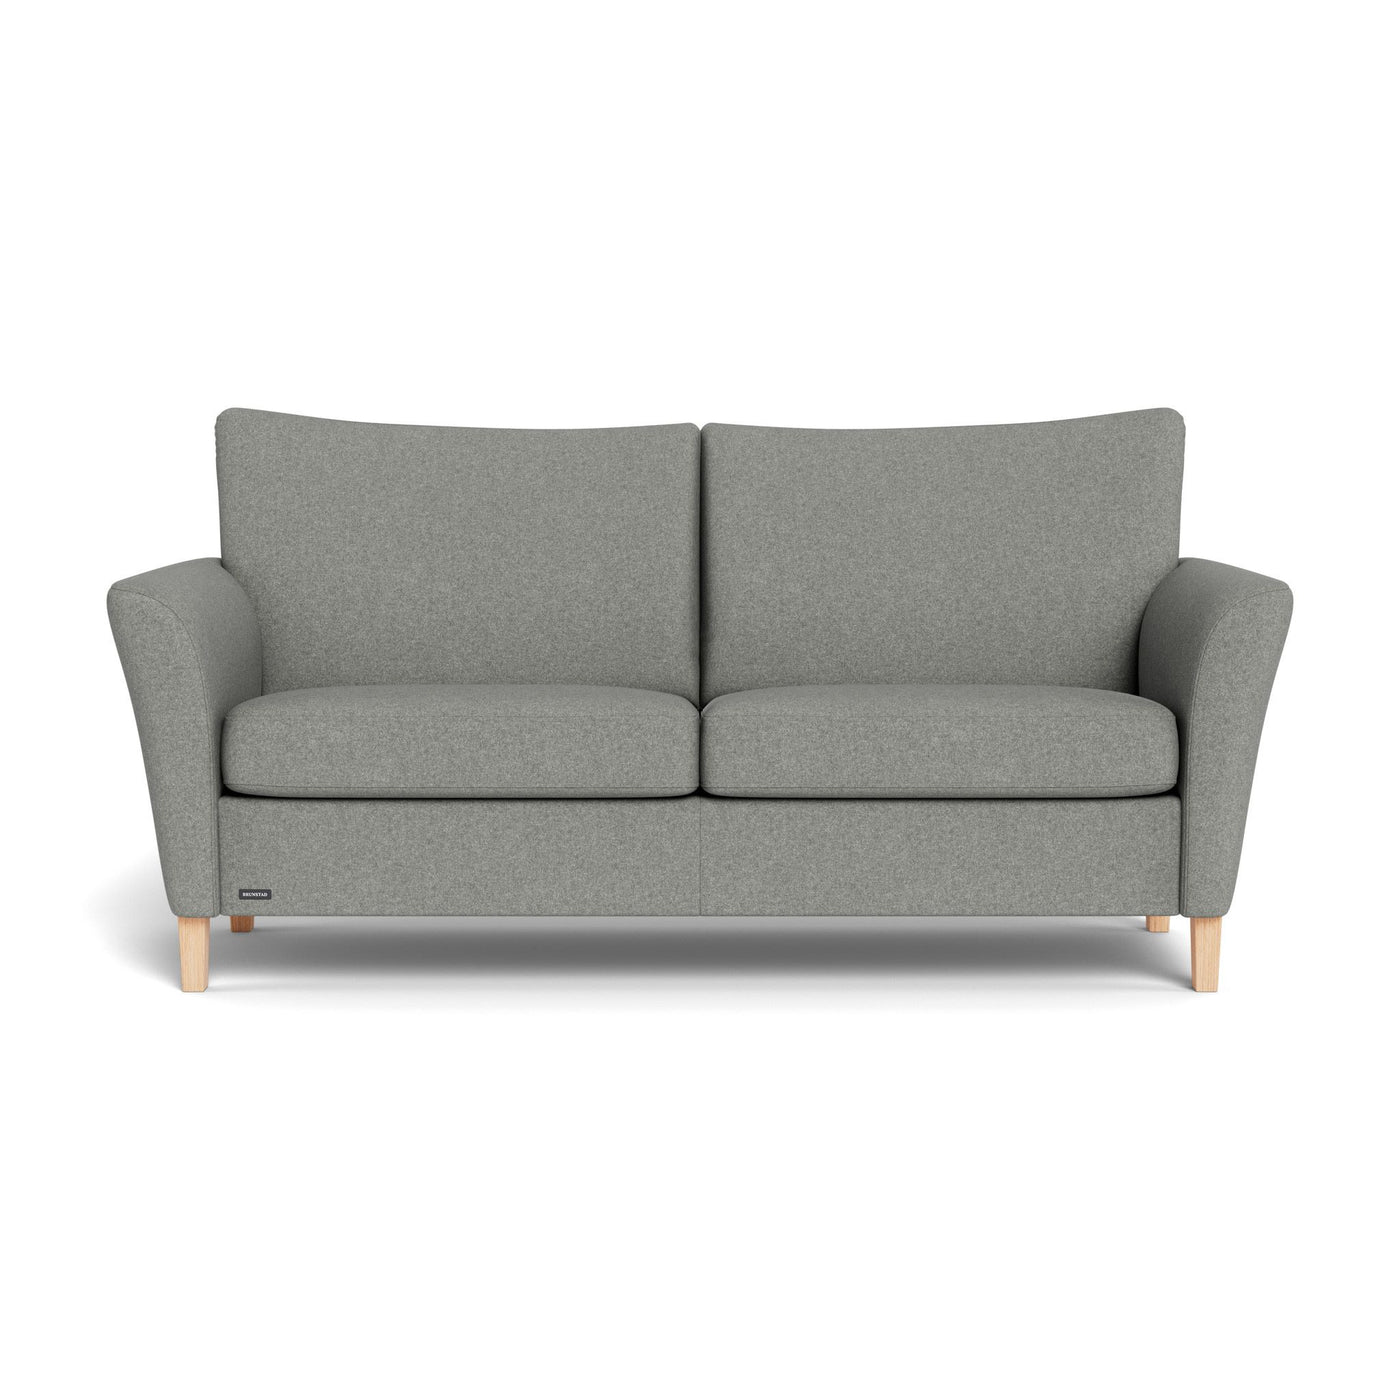 System+ | 3-personers sofa